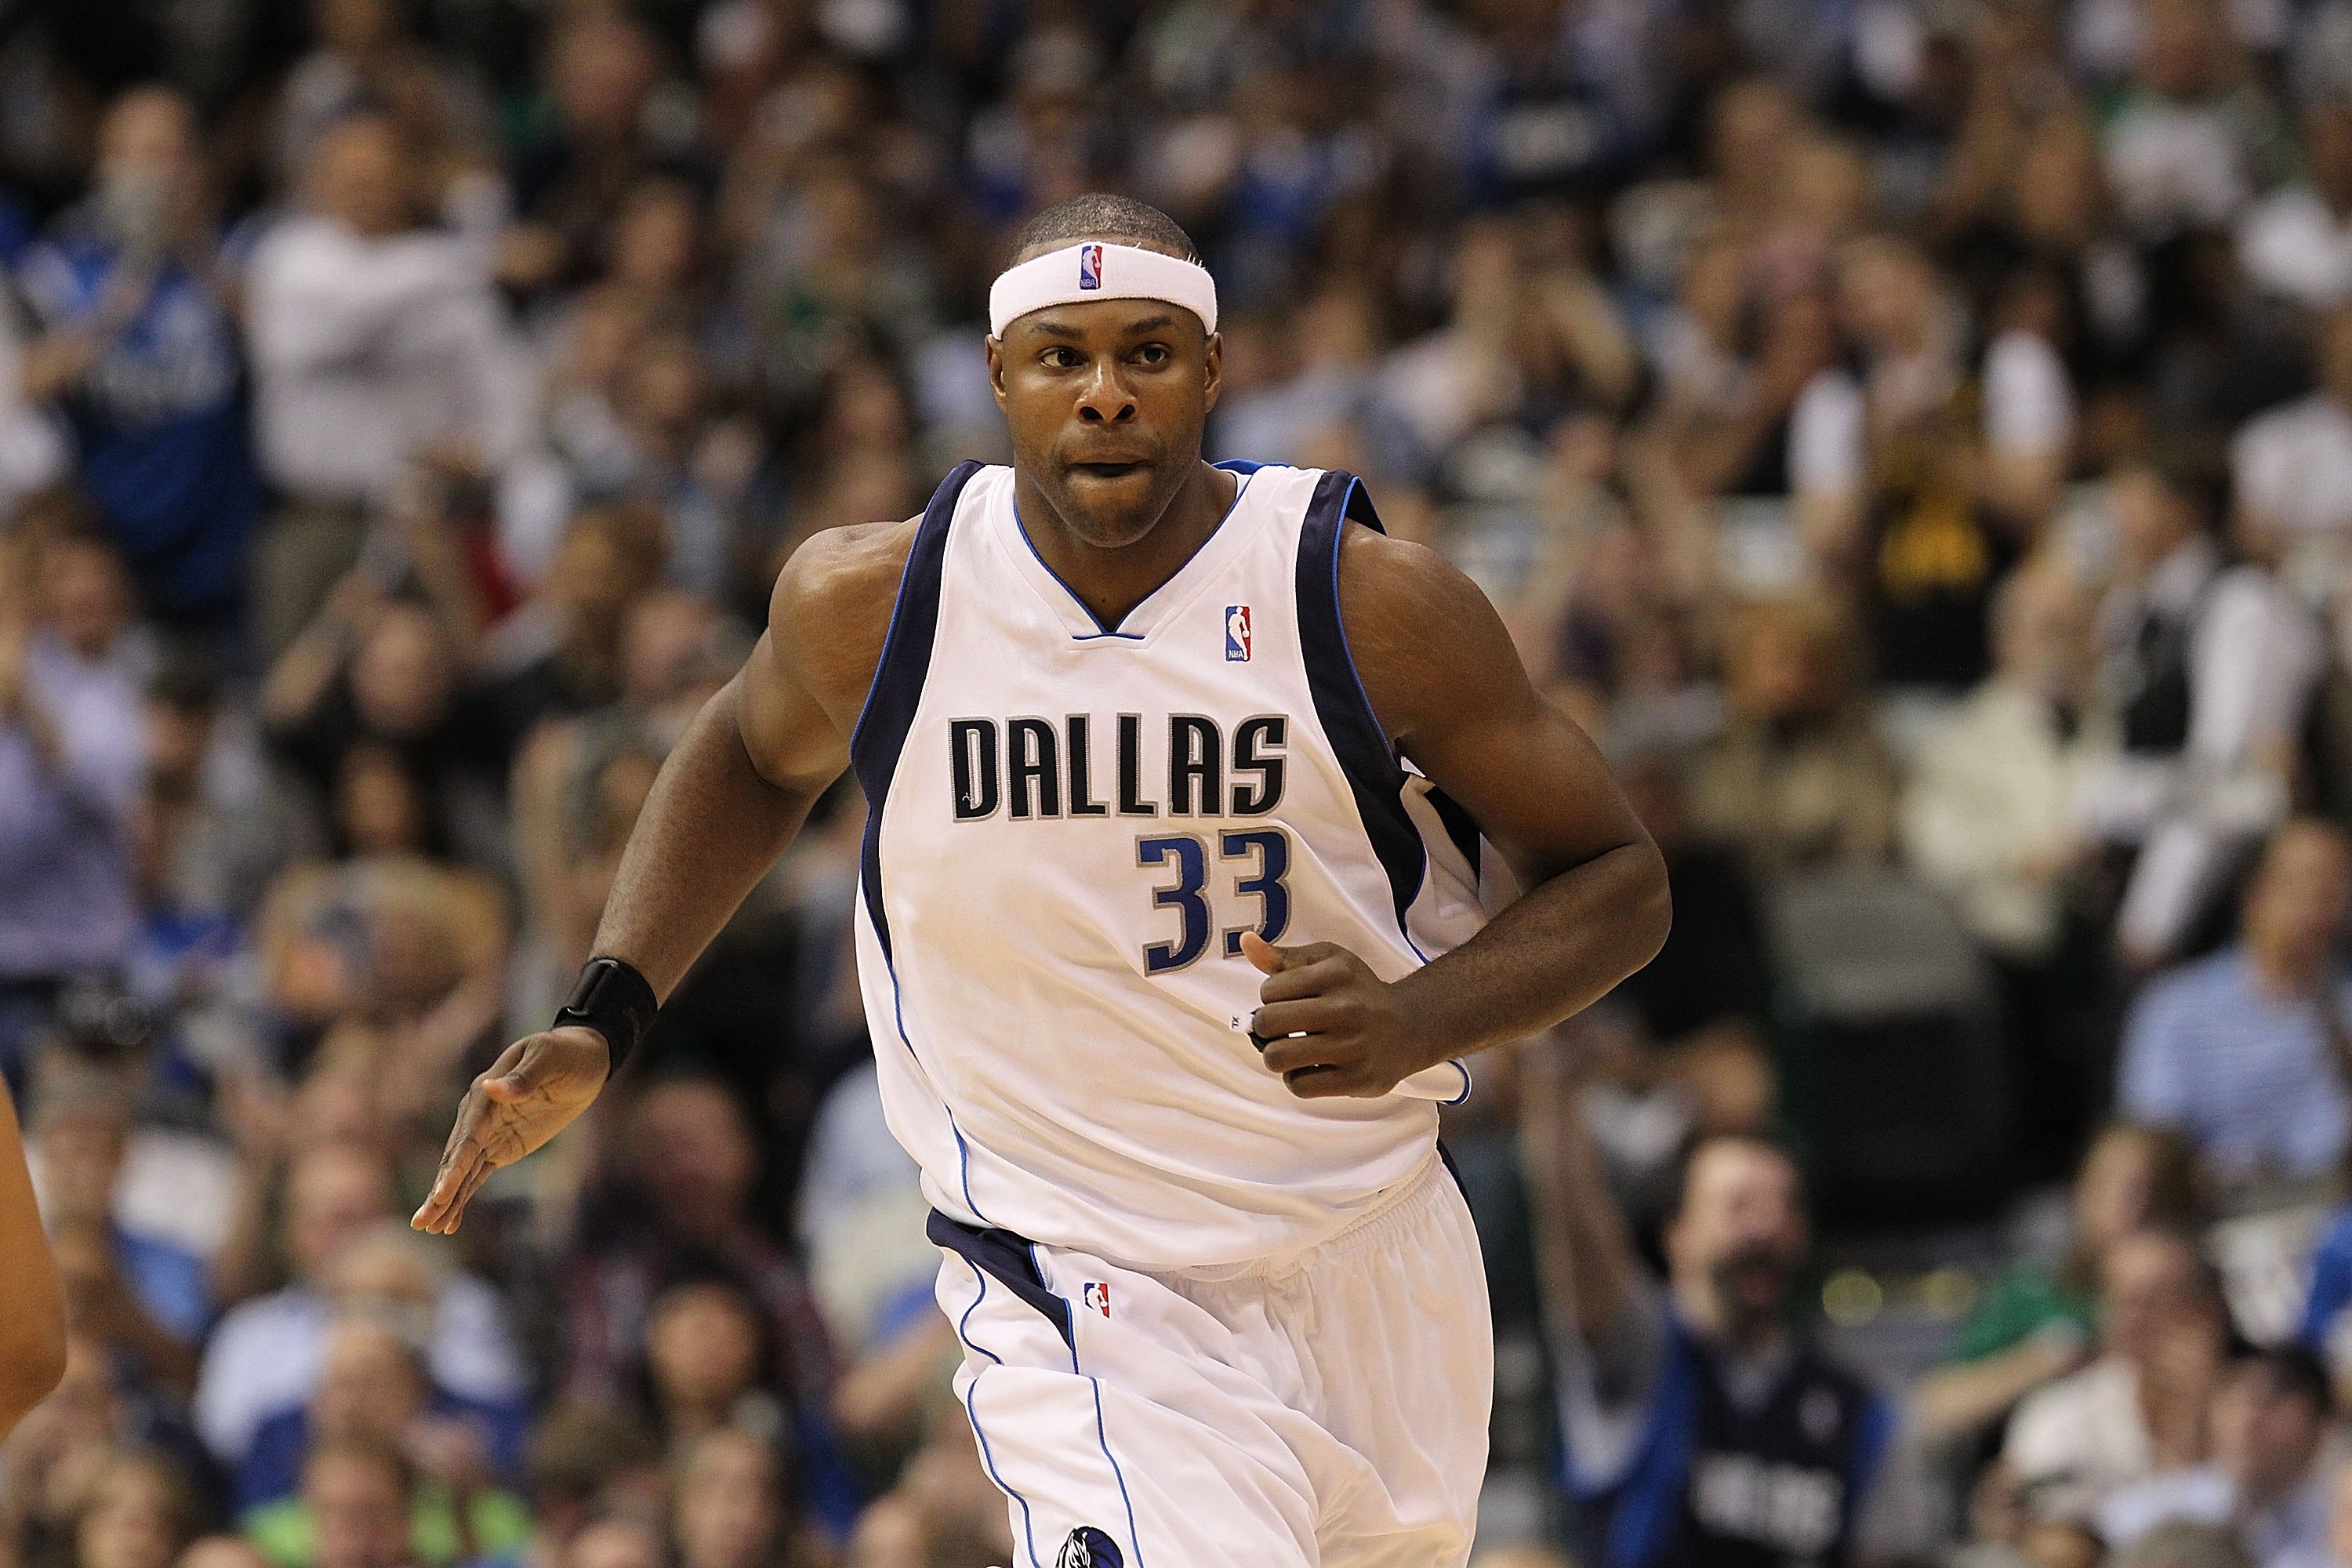 DALLAS - APRIL 27:  Brendan Haywood #33 of the Dallas Mavericks in Game Five of the Western Conference Quarterfinals during the 2010 NBA Playoffs at American Airlines Center on April 27, 2010 in Dallas, Texas. NOTE TO USER: User expressly acknowledges and